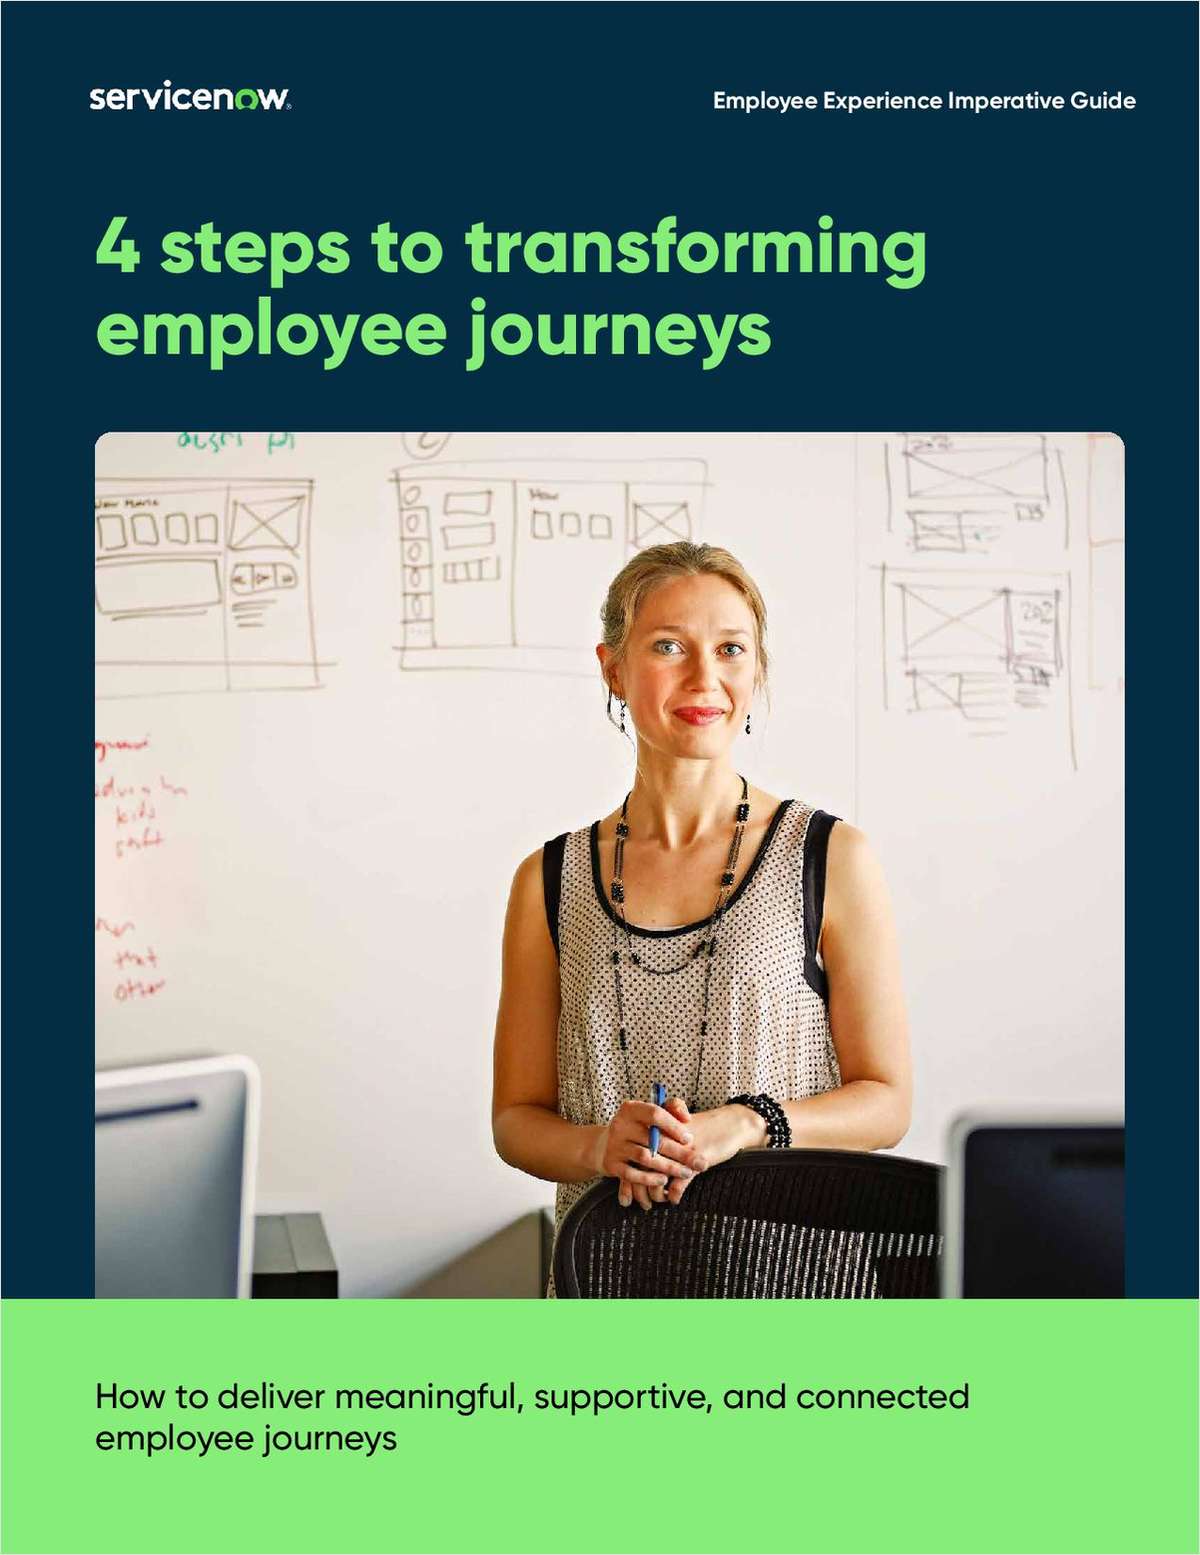 4 Steps to Transforming Employee Journeys